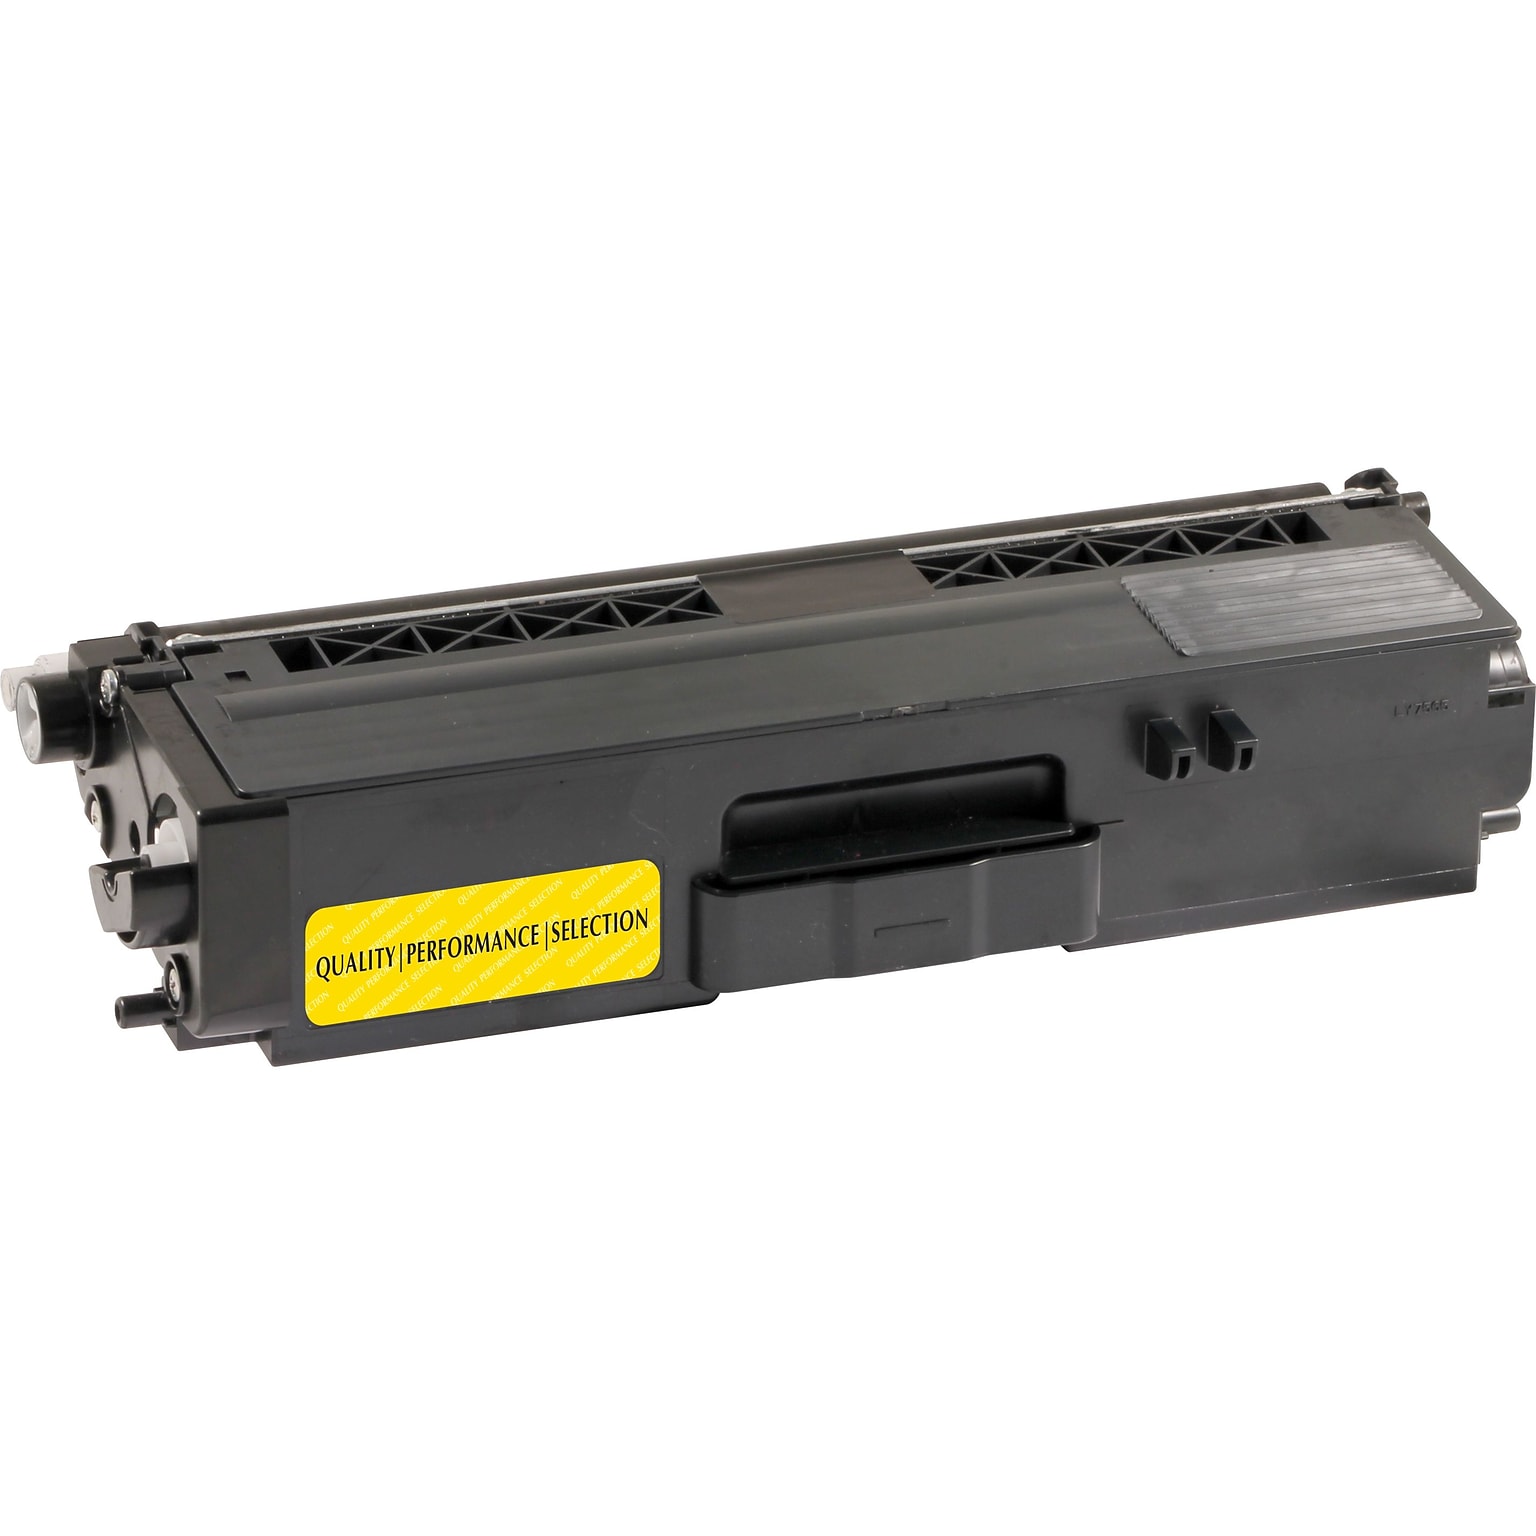 Quill Brand Remanufactured Yellow Standard Yield Toner Cartridge Replacement for Brother TN-331 (TN-331Y)